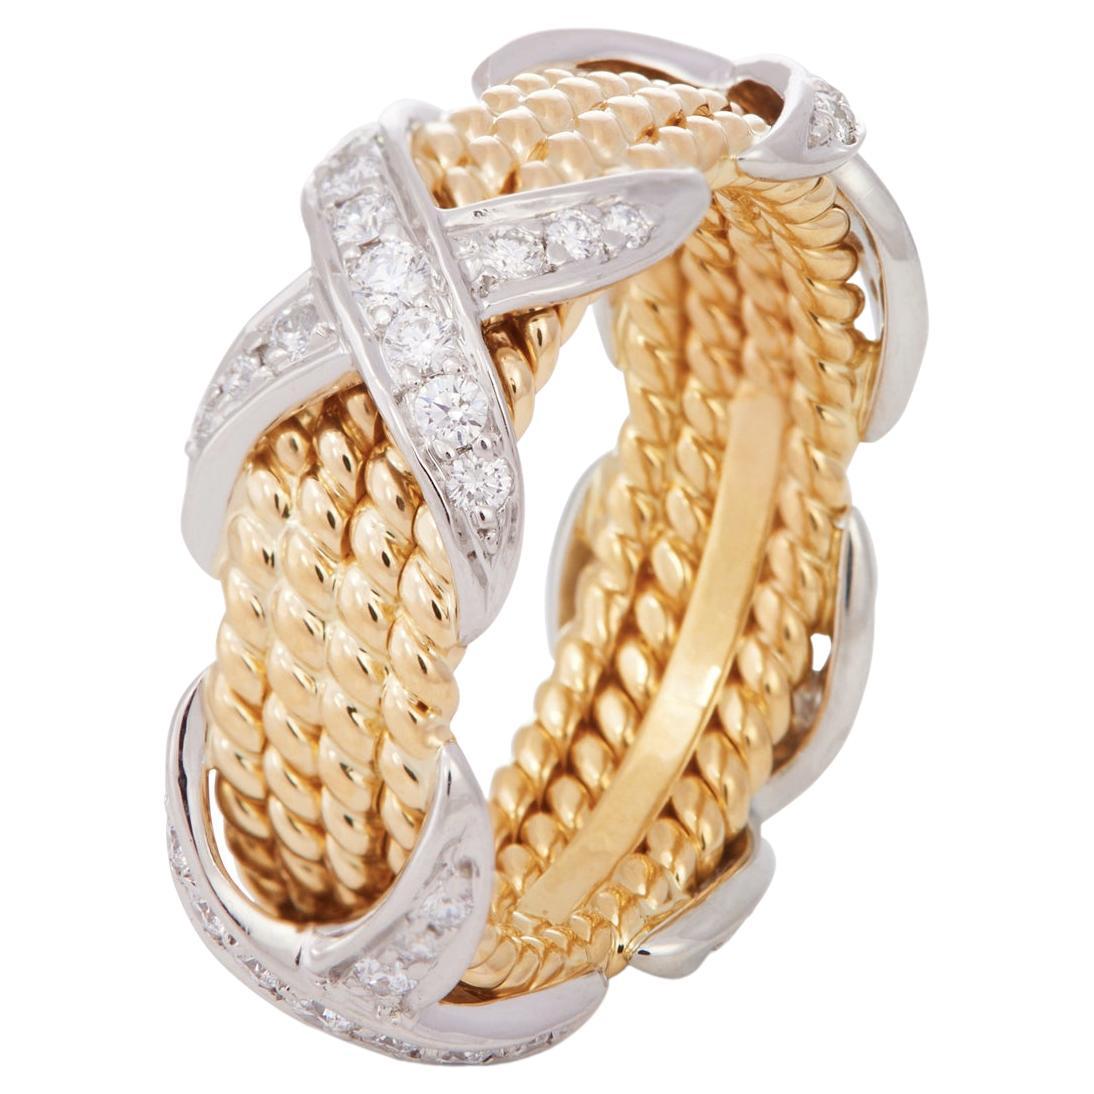 Jean Schlumberger for Tiffany & Co. Rope Four-Row X Ring